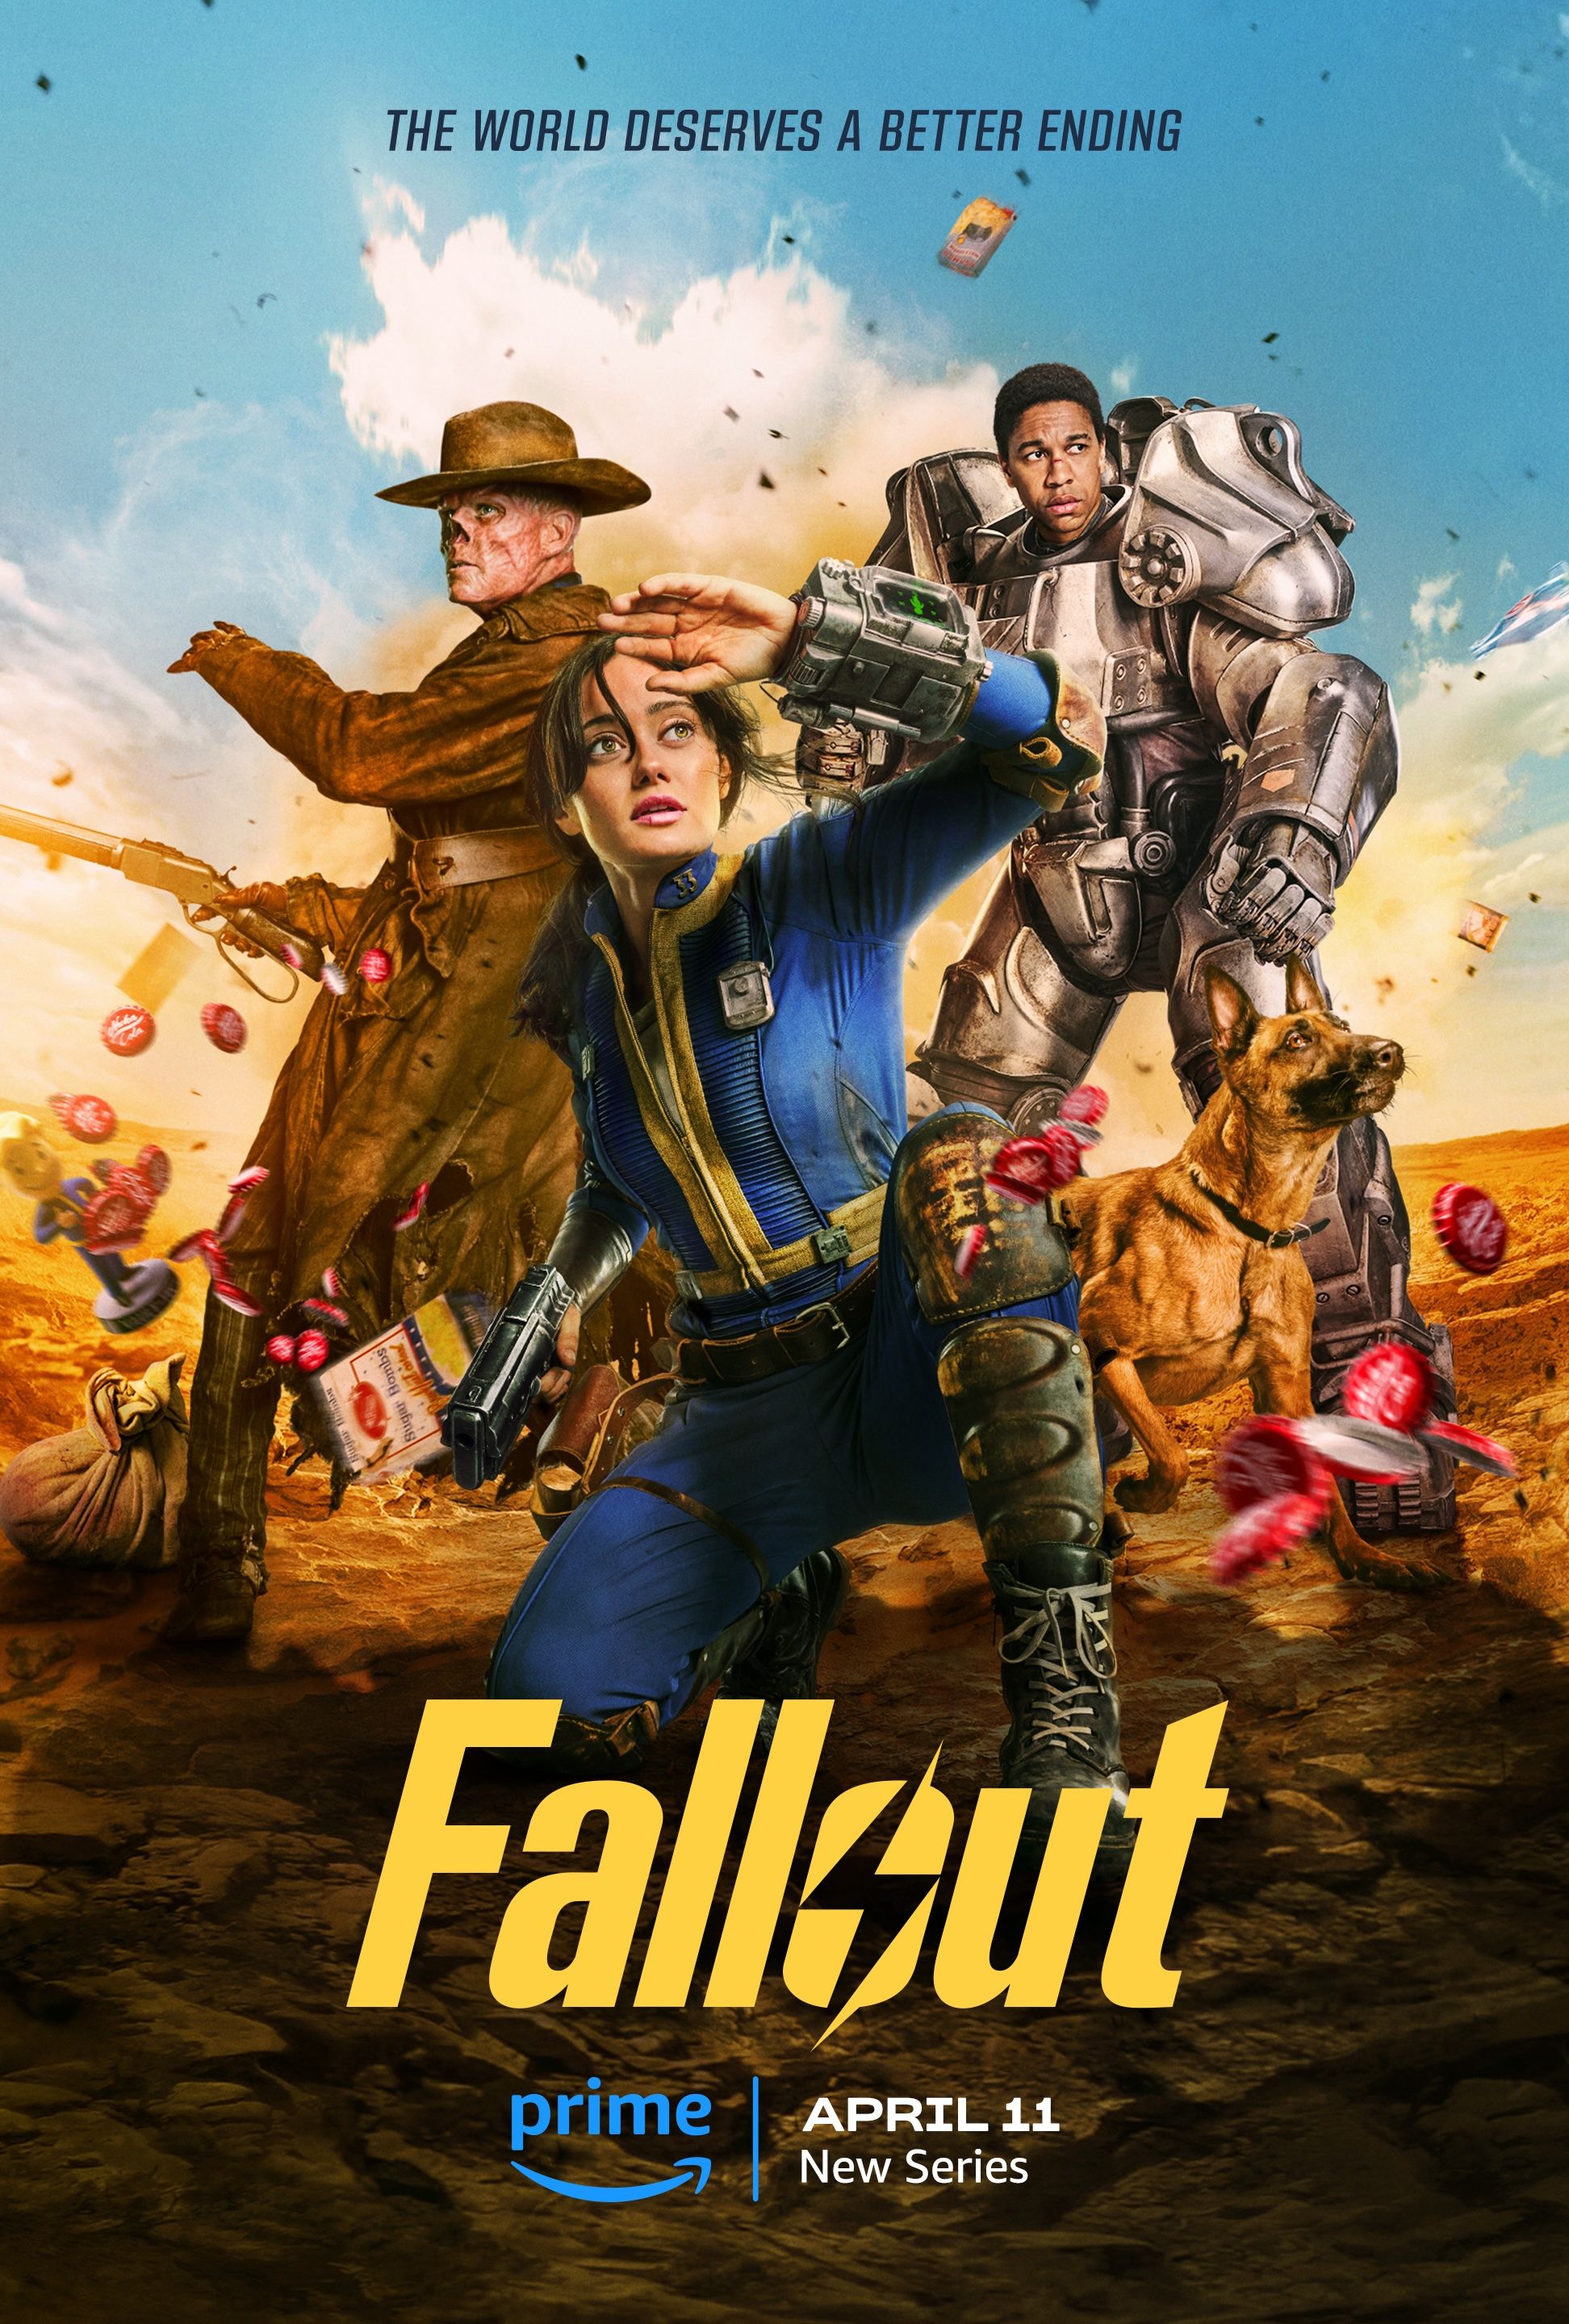 Key Fallout Game Elements Adapted To The Show Detailed By Creators